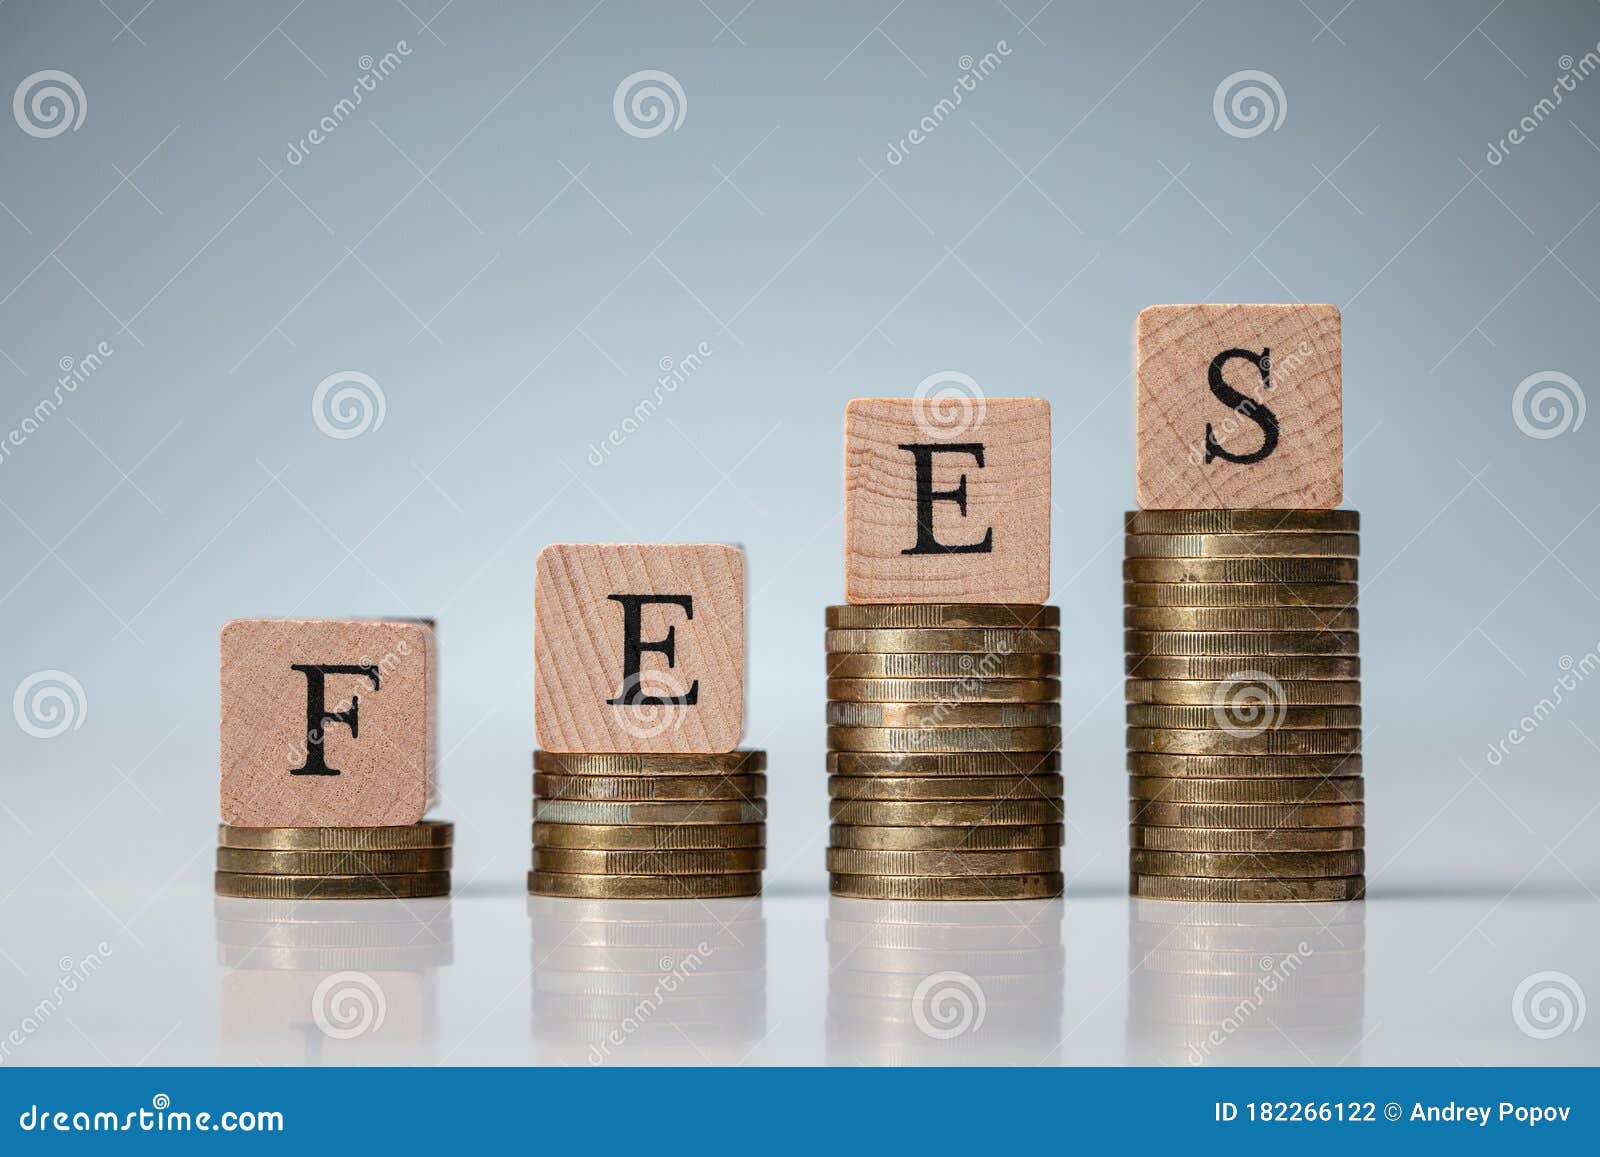 fees on increasing coins stacks